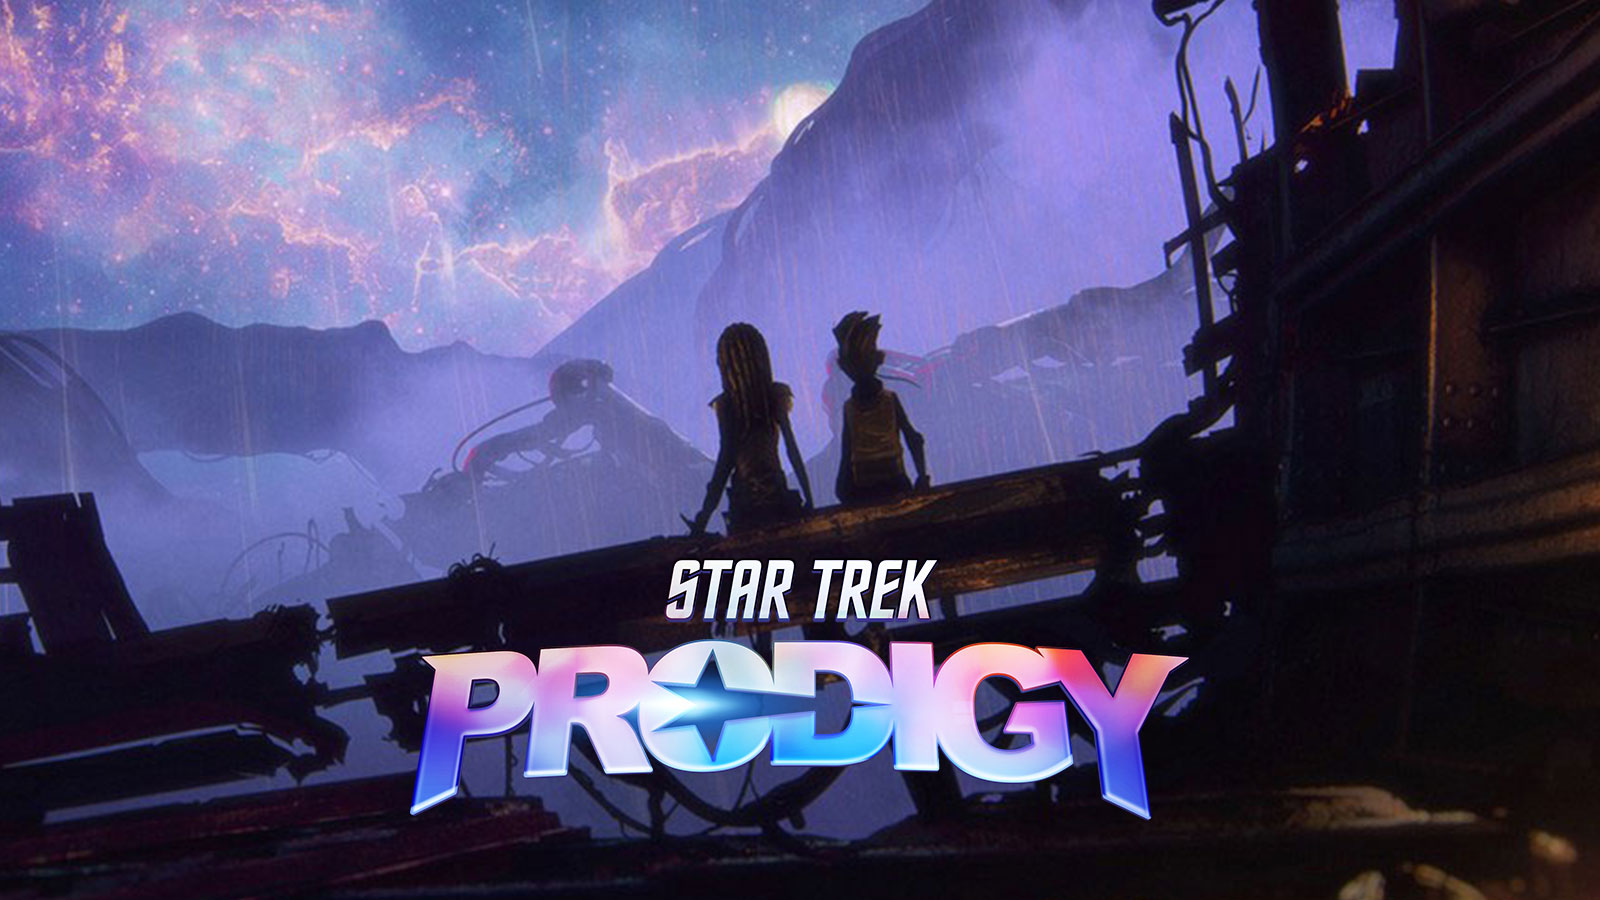 New Star Trek: Prodigy 'Environmental' Images Show Of The Alien Worlds Of The Upcoming Series